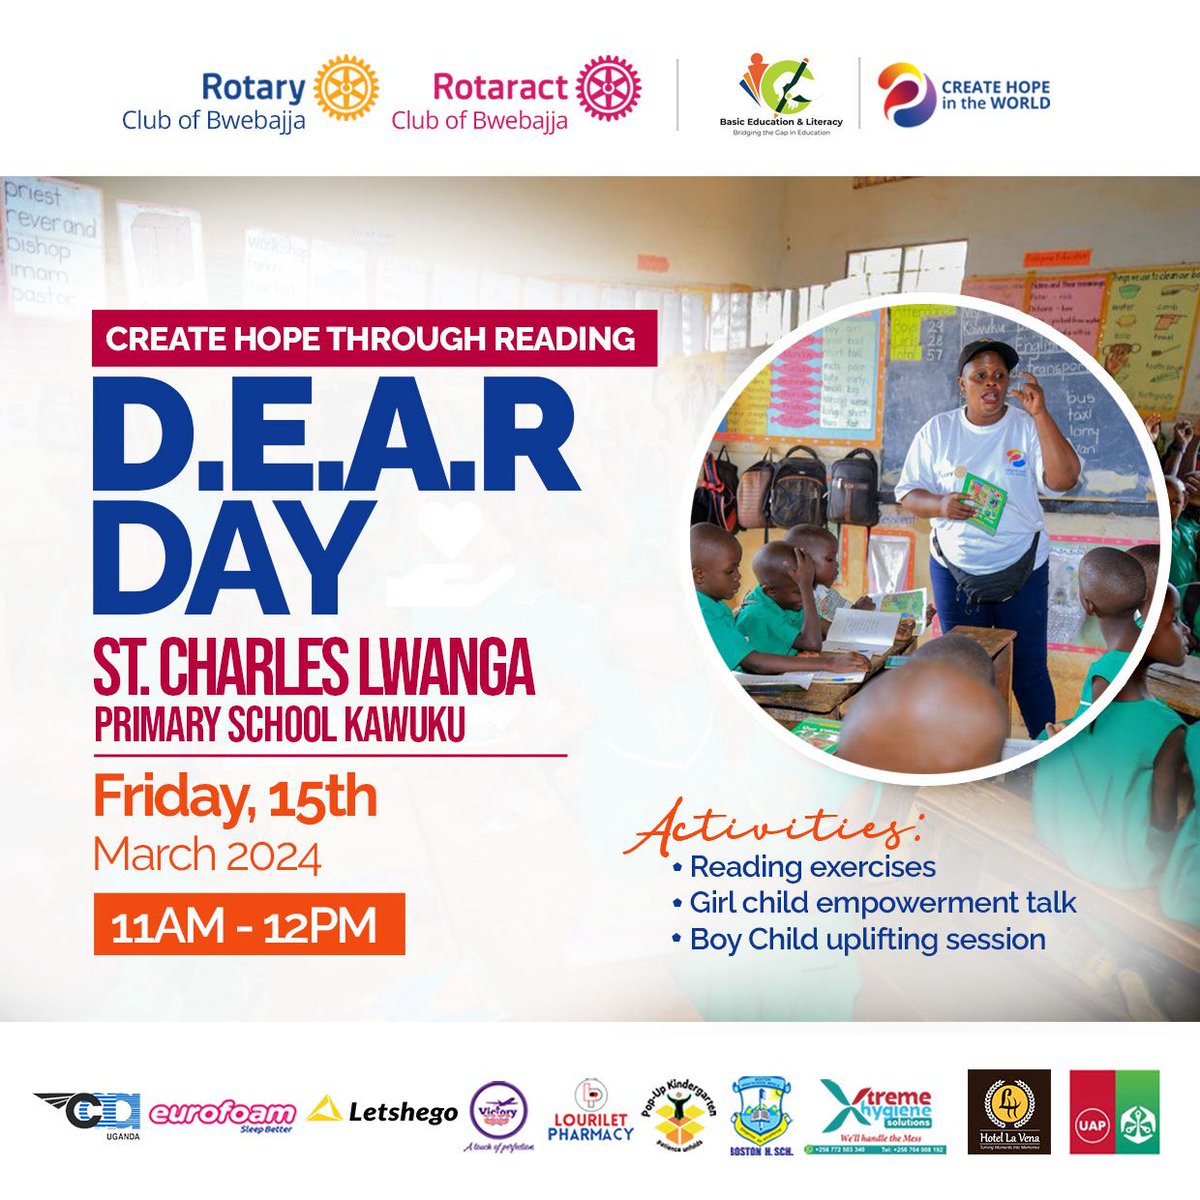 It's back and Big , I mean Dropping Everything And Read ( D.E.A.R Day) 
We shall be at St Charles Lwanga Primary School Kawuku for this big day . Kindly join us for #DEARDay 
#CreatingHopeThroughReading